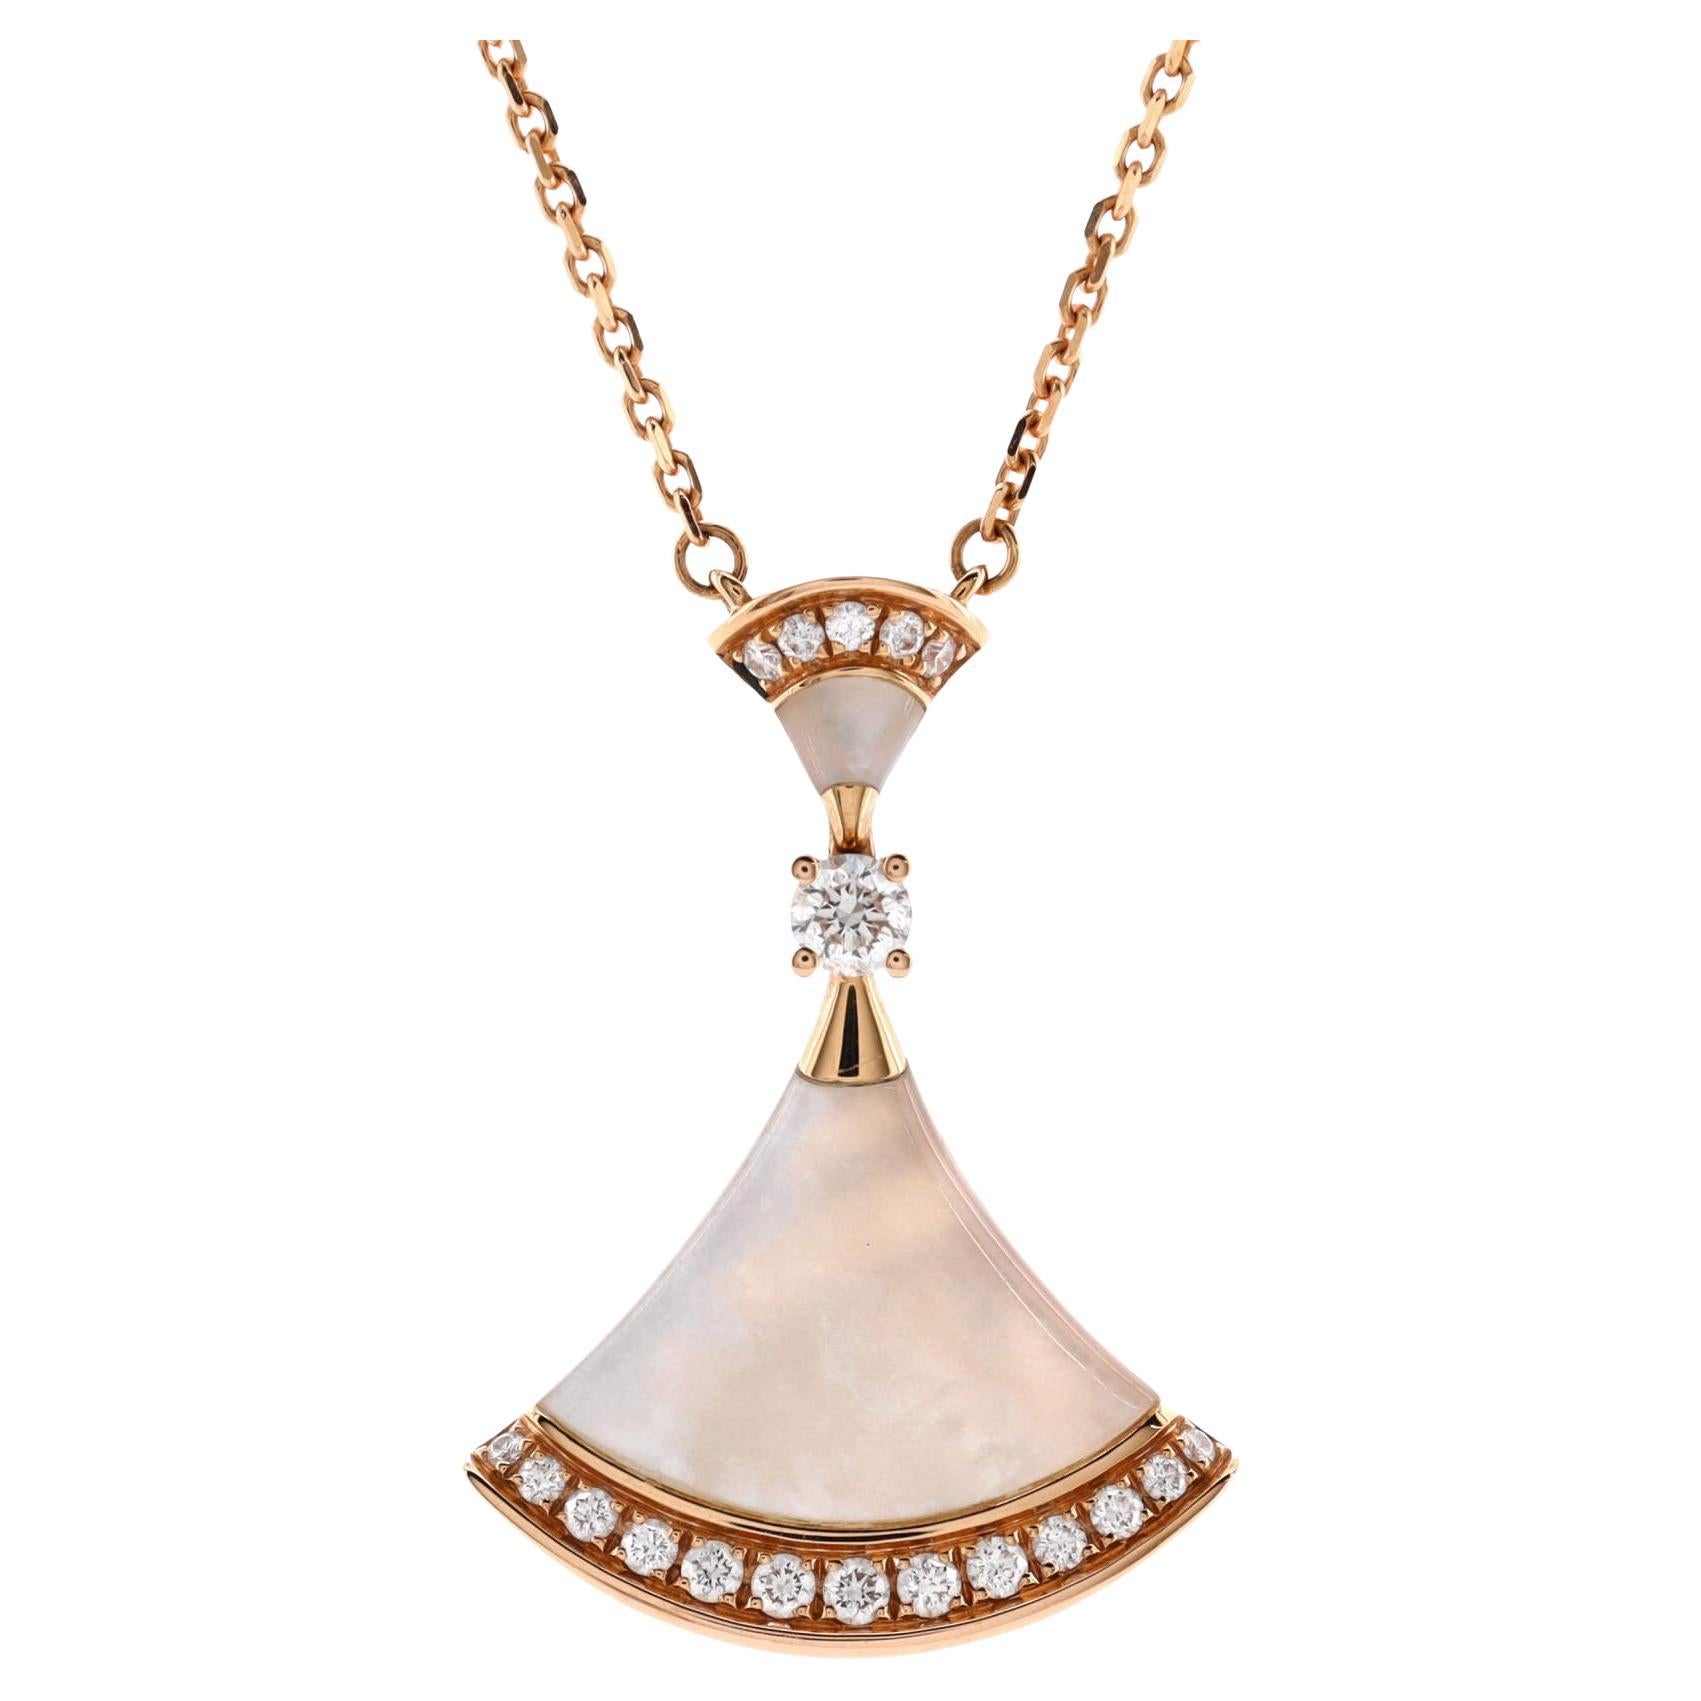 Bvlgari Divas' Dream Pendant Necklace 18k Rose Gold with Mother of Pearl